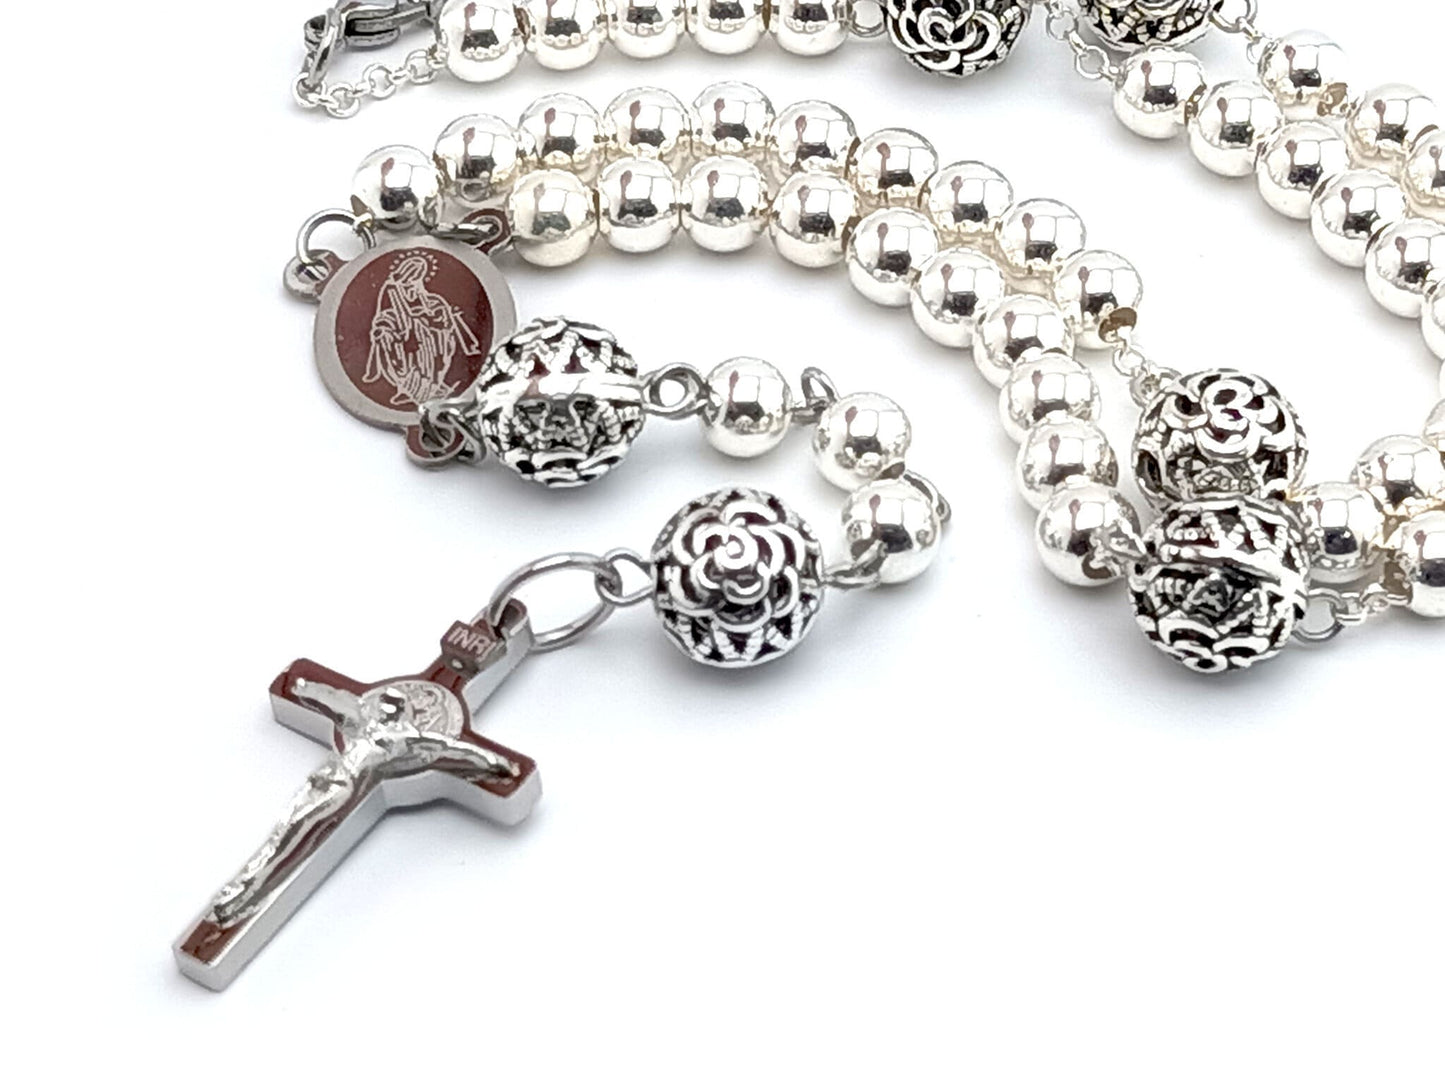 Our Lady of Grace unique rosary beads 925 sterling silver rosary necklace with stainless steel Saint Benedict crucifix and etched medal.